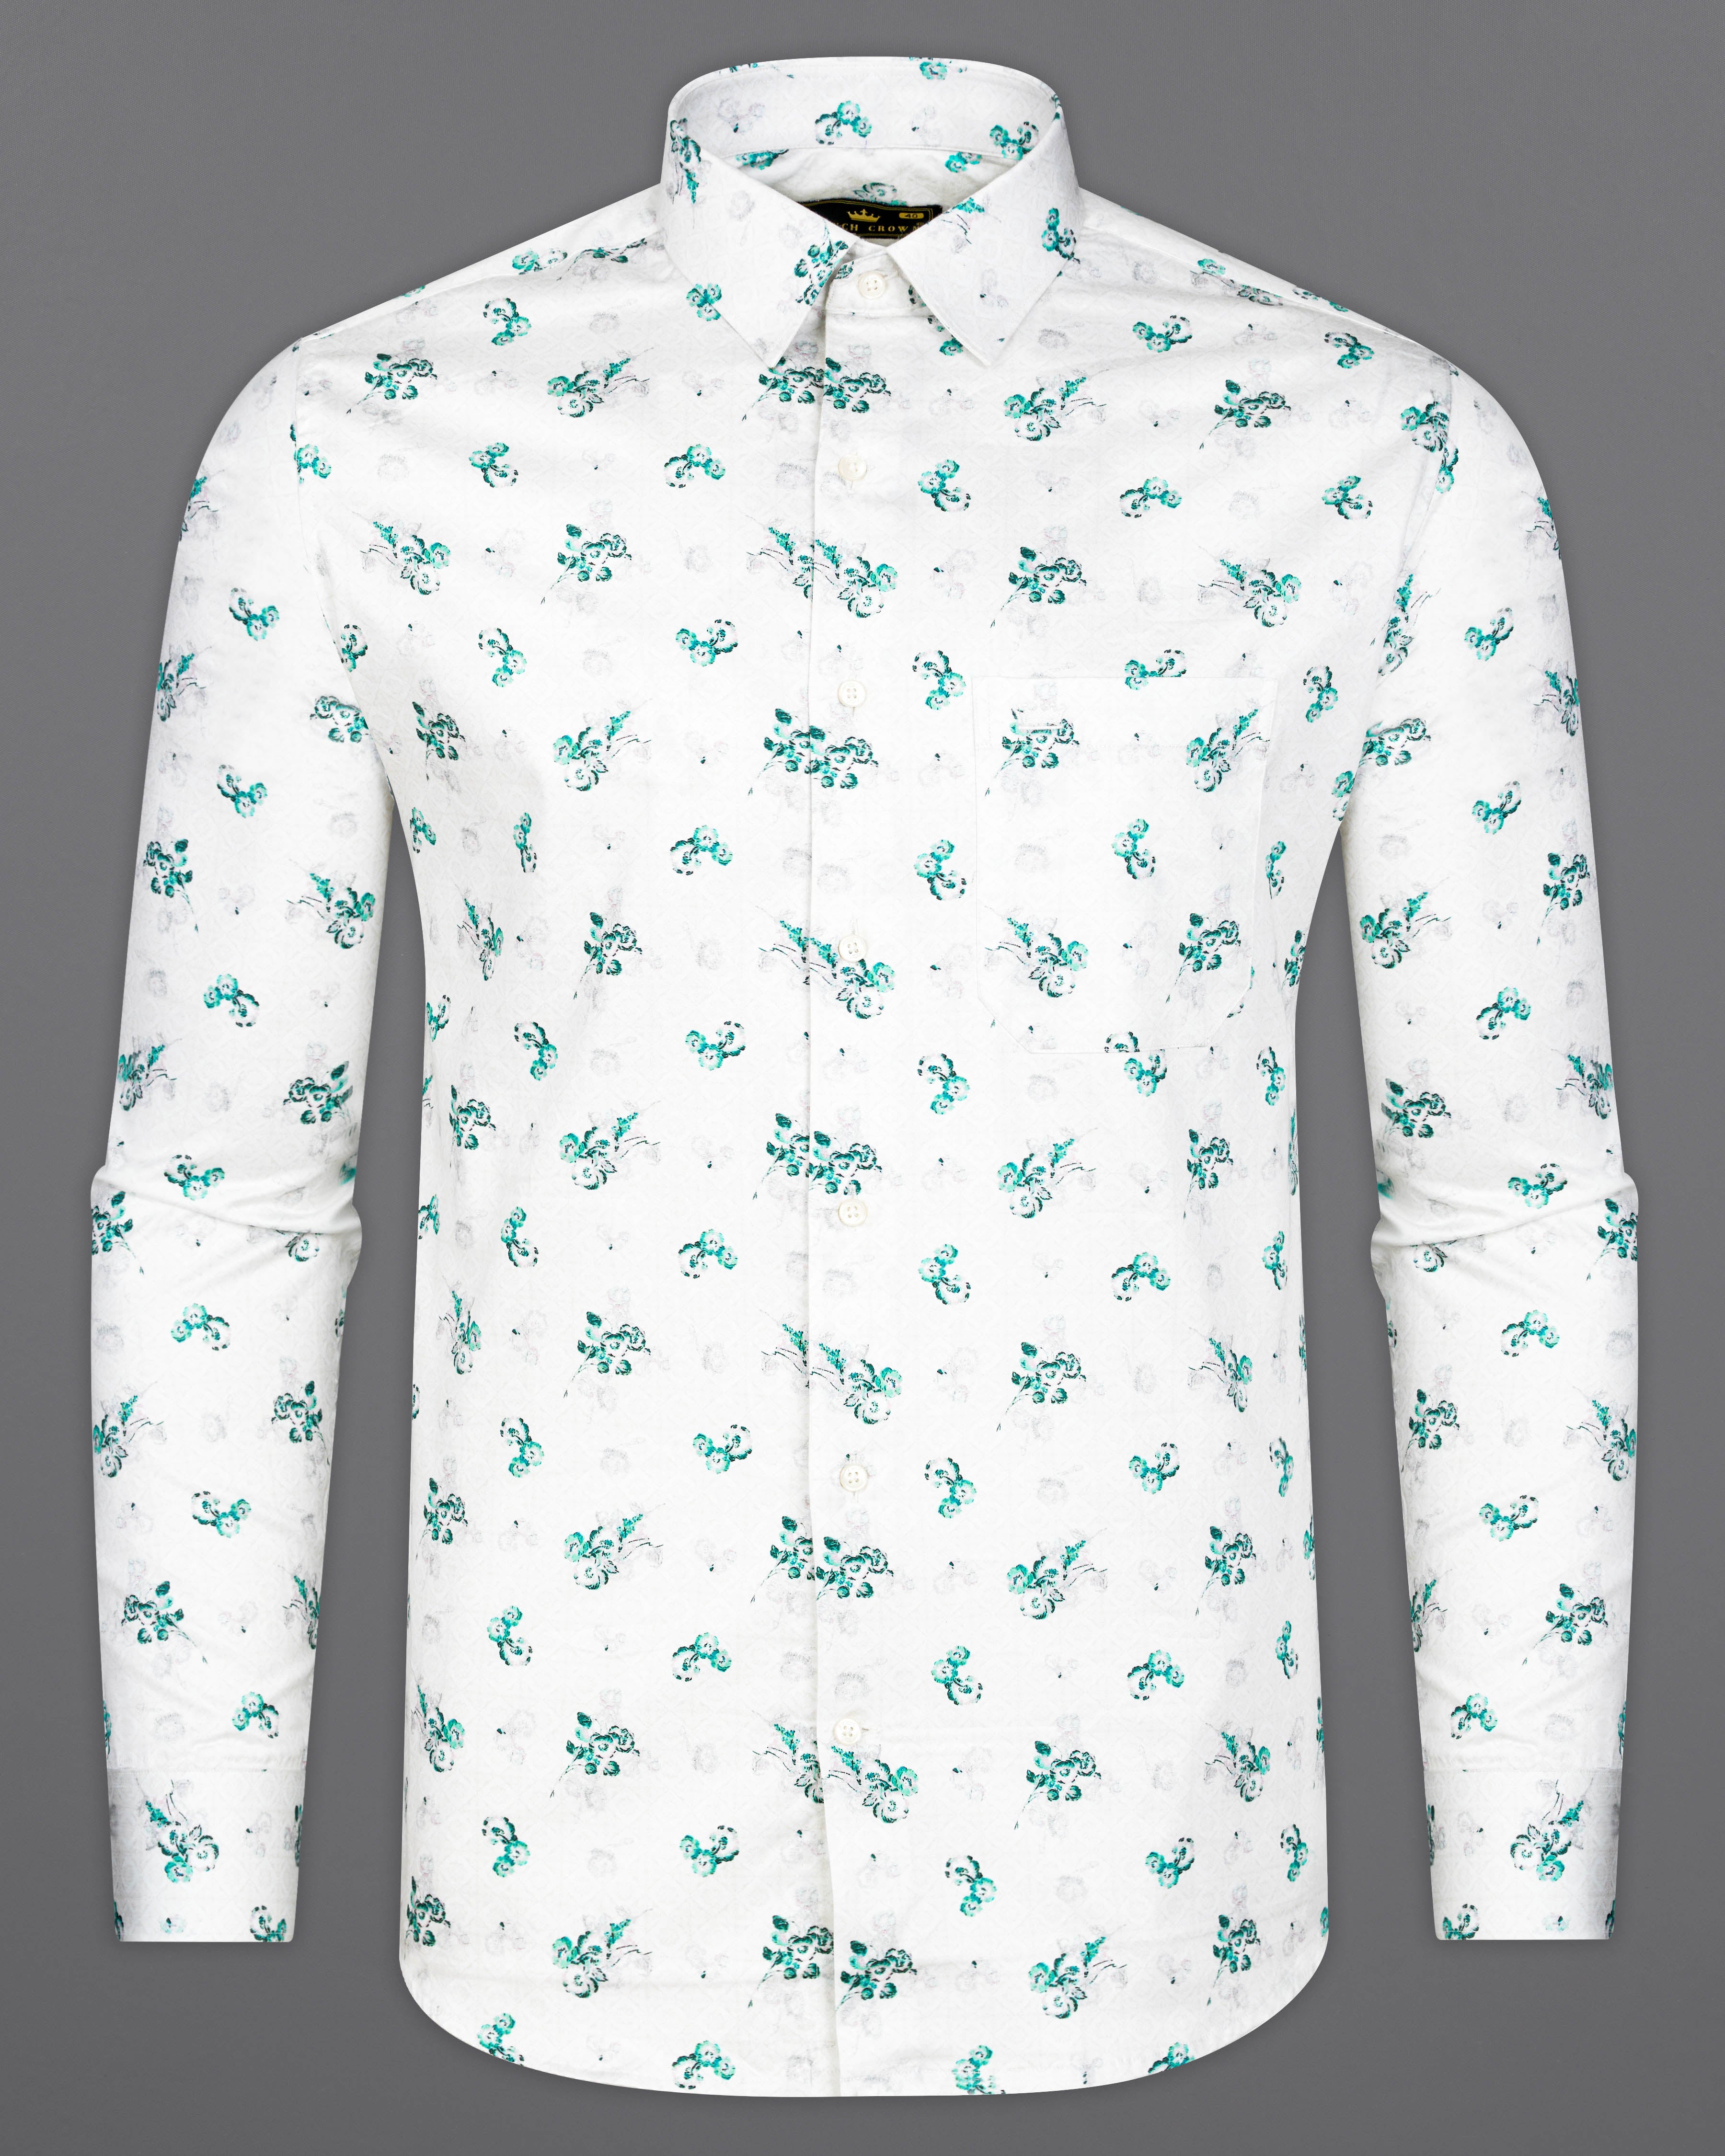 Bright White with Chinook Green Ditsy Printed Super Soft Premium Cotton Shirt 9529-38, 9529-H-38, 9529-39, 9529-H-39, 9529-40, 9529-H-40, 9529-42, 9529-H-42, 9529-44, 9529-H-44, 9529-46, 9529-H-46, 9529-48, 9529-H-48, 9529-50, 9529-H-50, 9529-52, 9529-H-52